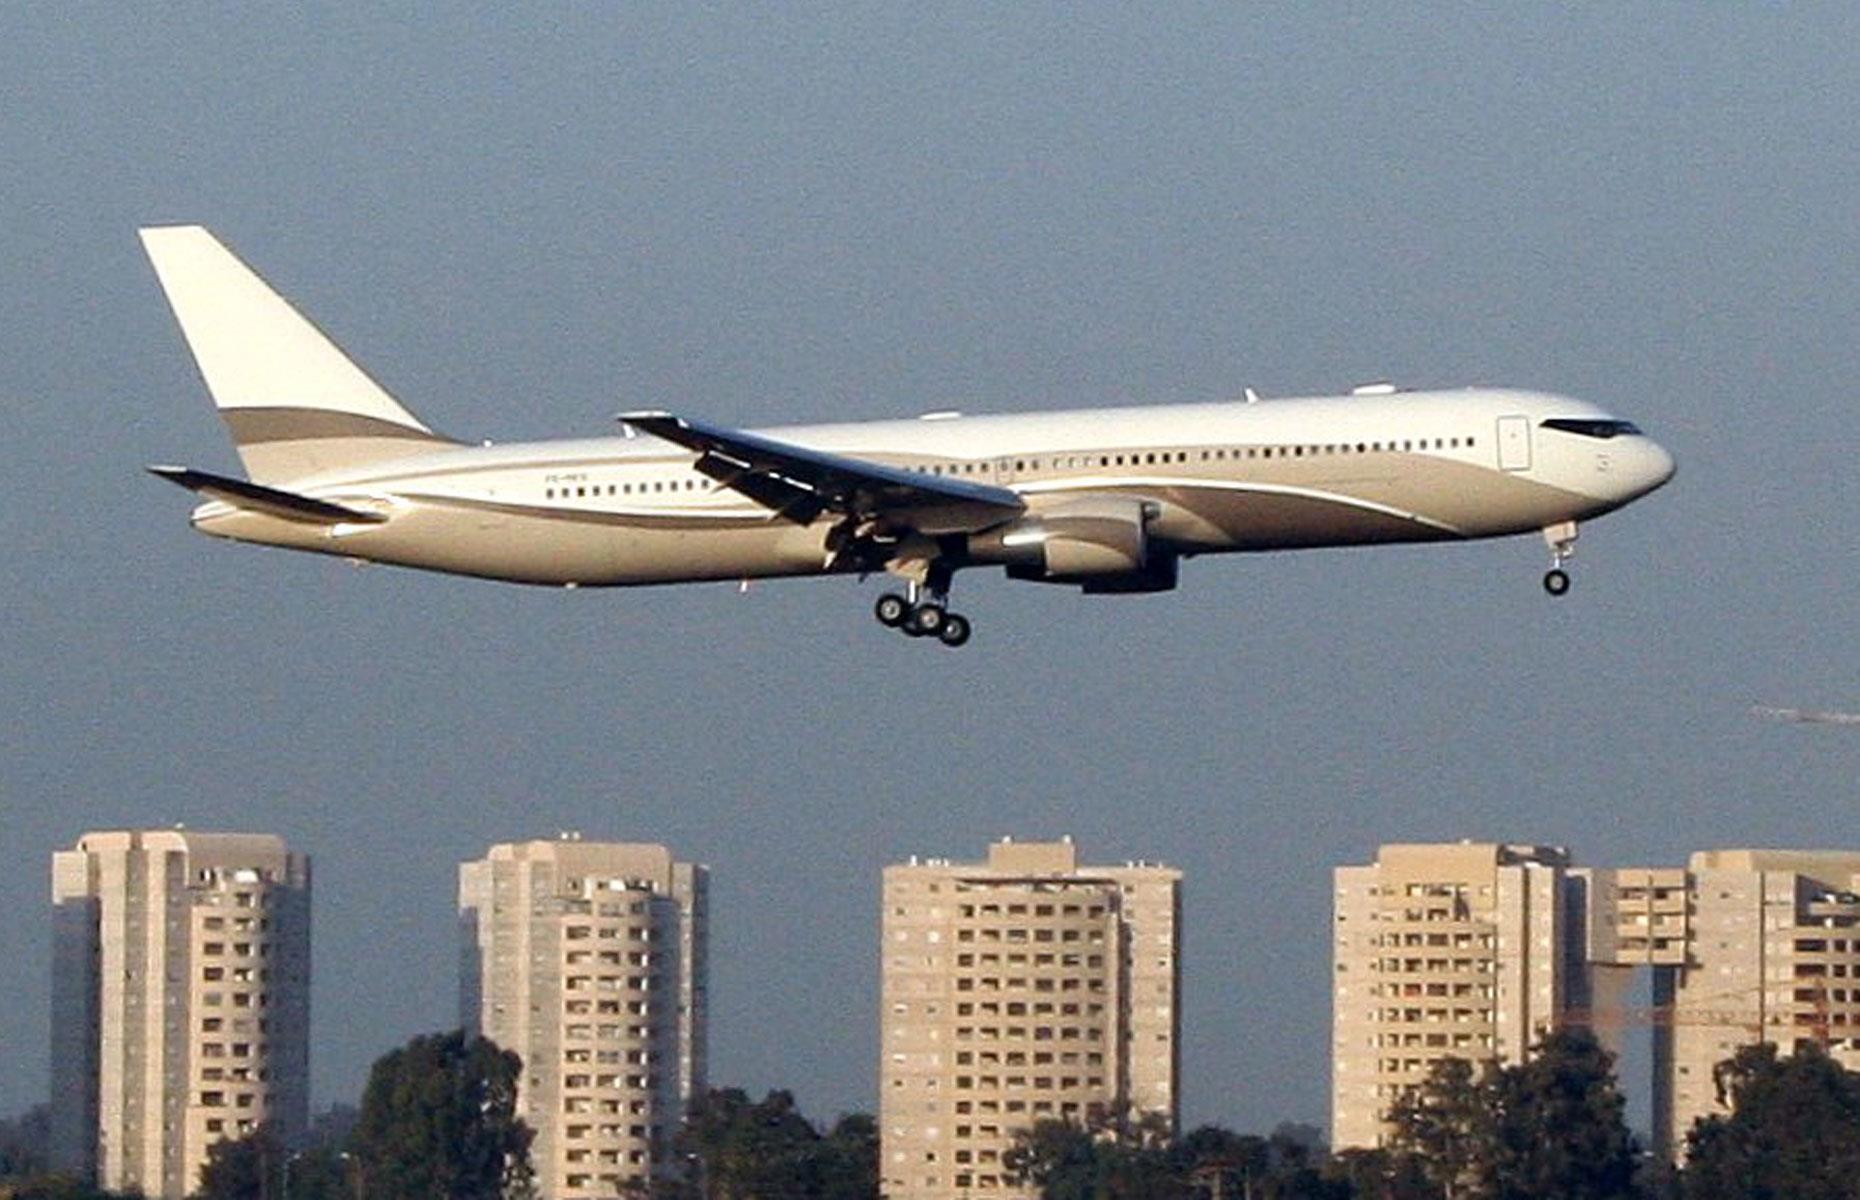 <p>This sleek Boeing belongs to Russian oligarch, and former owner of England's Chelsea soccer team, Roman Abramovich, who purchased it in 2004.</p>  <p>With capacity for around 30 people, it reportedly boasts its very own banquet hall for elegant mile-high dining.</p>  <p>Essentially a flying fortress, the aircraft is also equipped with its own advanced missile warning system and radar-jamming technology.</p>